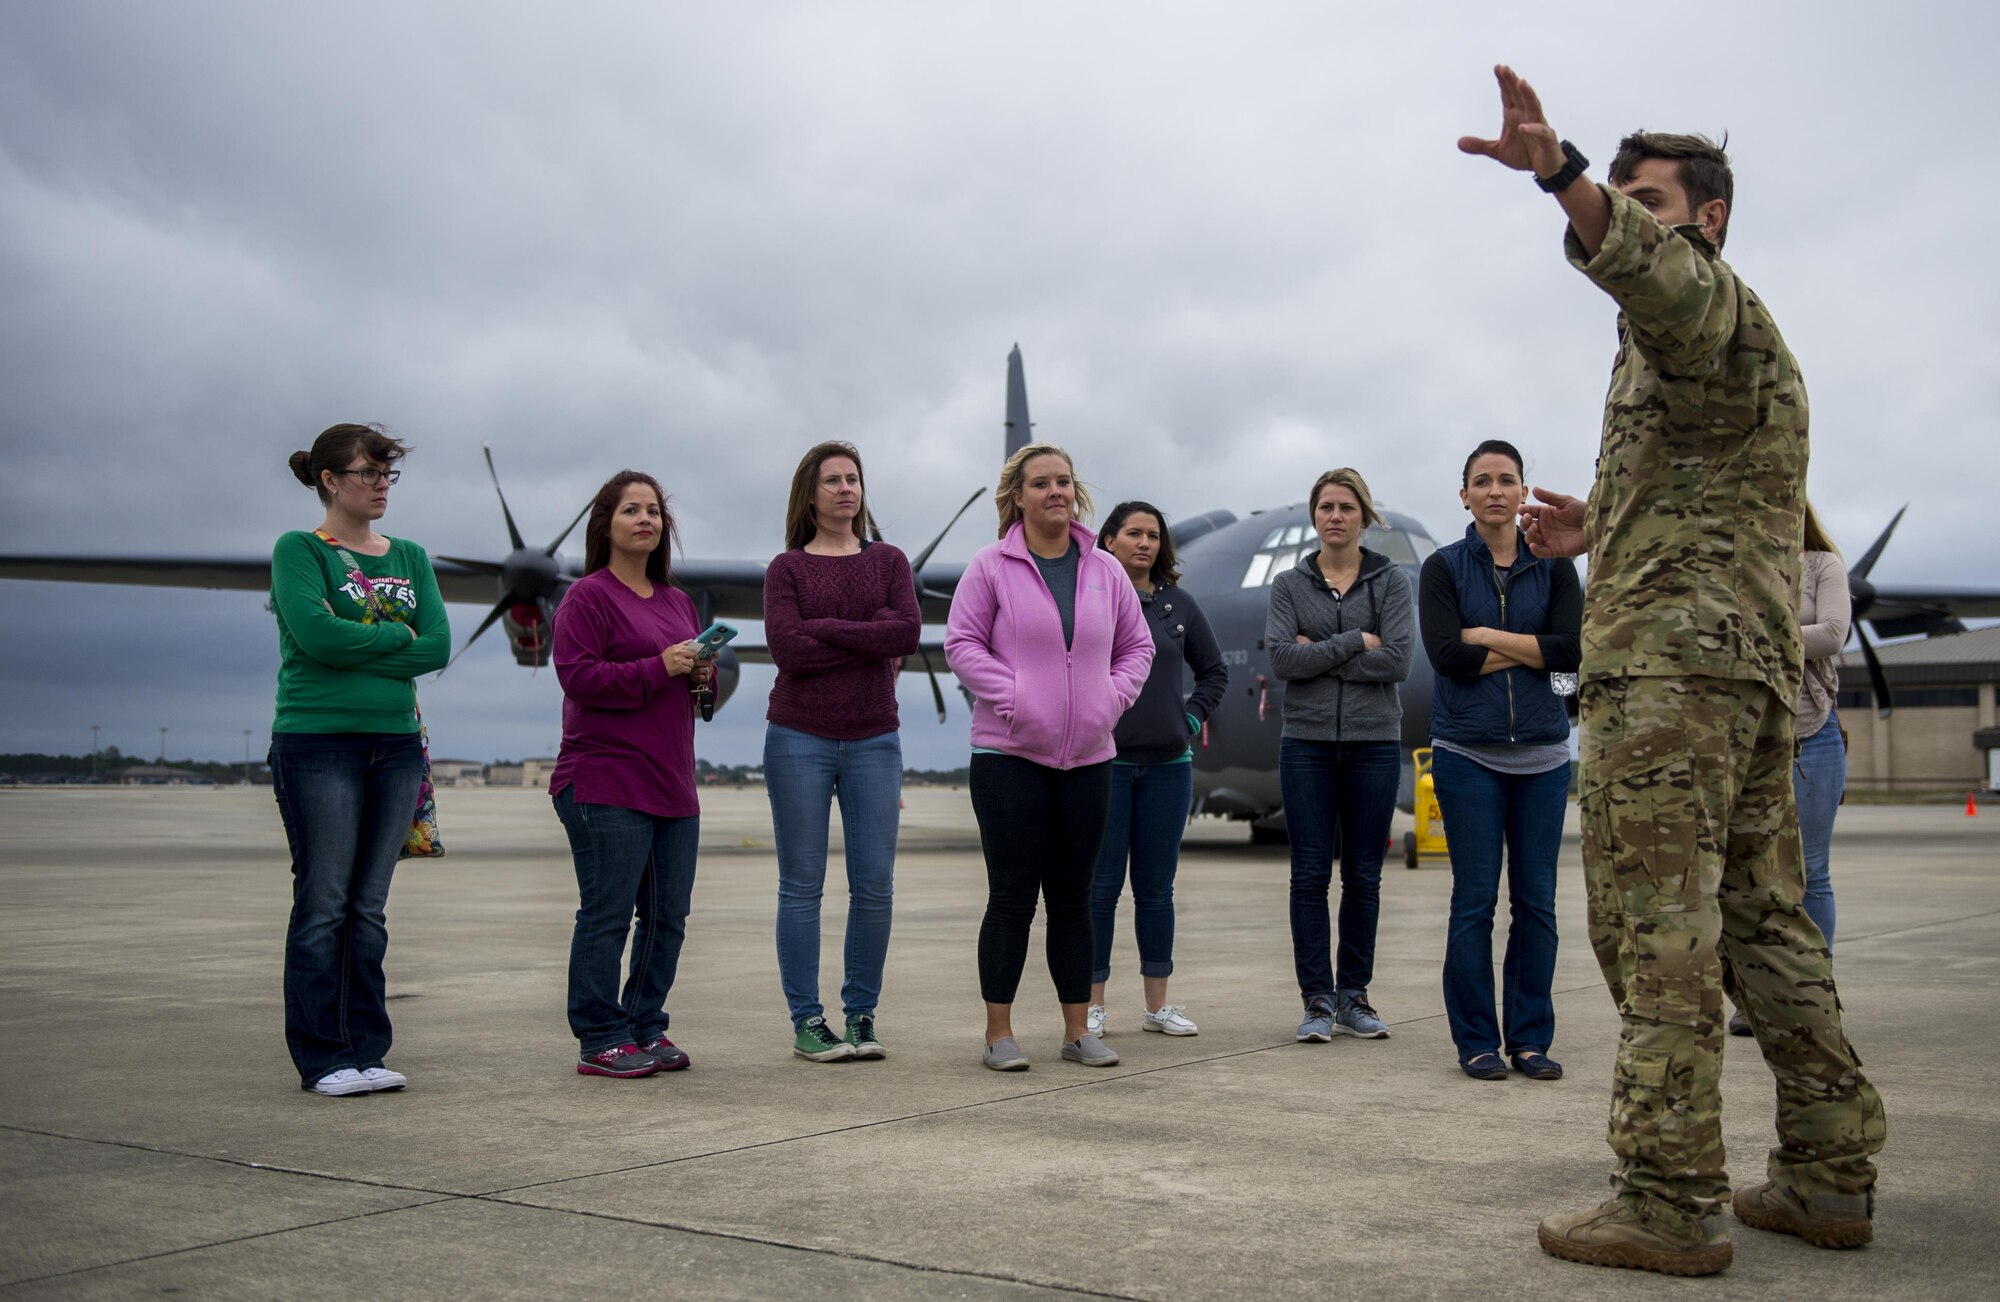 Spouses of Air Commandos receive a brief during a Spouses Flight tour at Hurlburt Field, Fla., Nov. 19, 2016. Spouses had the opportunity to fly in different aircraft including the AC130-J Ghostrider, CV-22 Osprey, AC-130U Spooky and U-28A in order to develop a better understanding of the 1st Special Operations Wing mission. (U.S. Air Force photo by Airman 1st Class Isaac O. Guest IV)